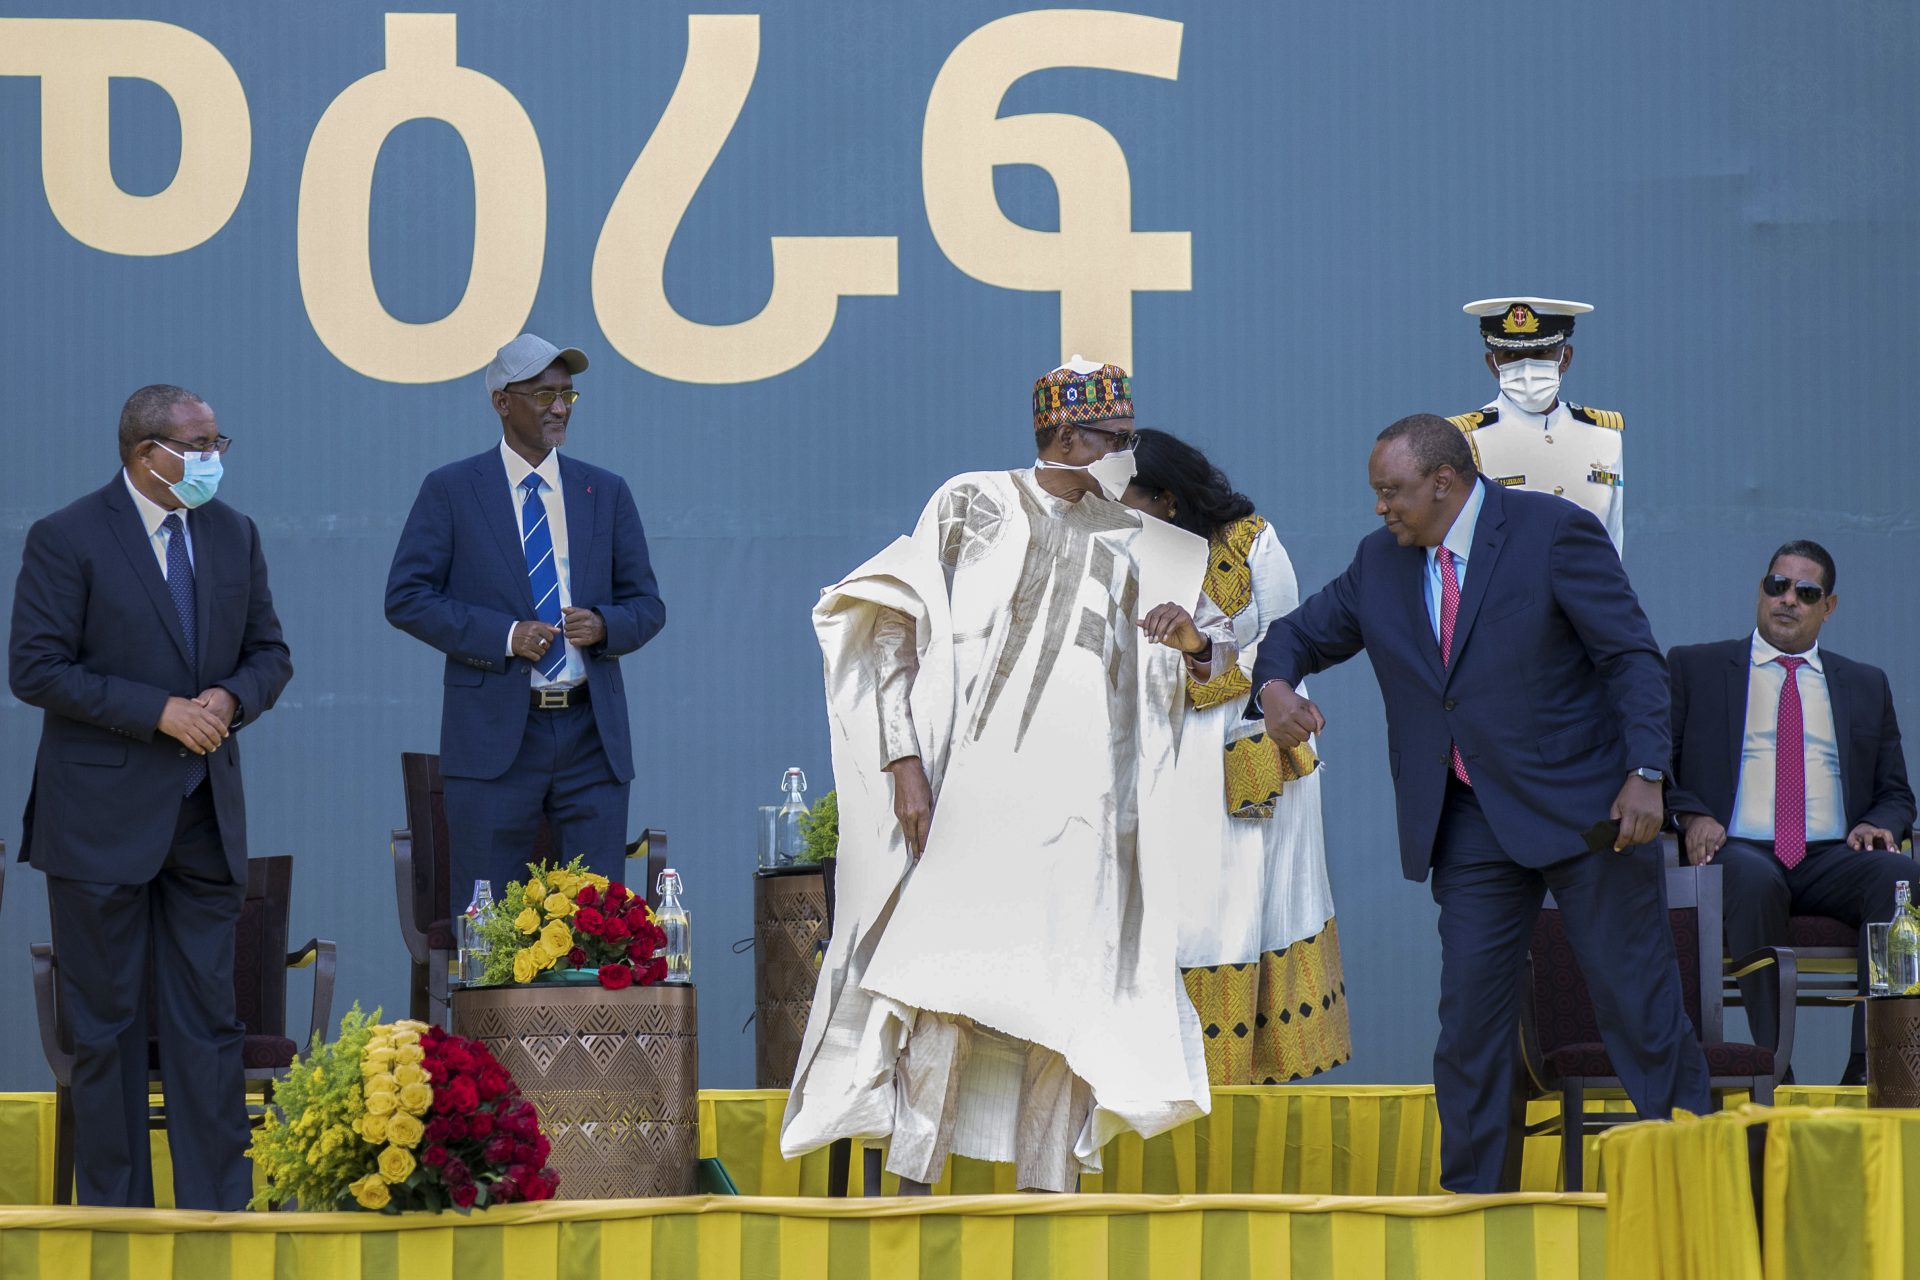 Kenya's President Uhuru Kenyatta, right, greets Nigeria's President Muhammadu Buhari, center, at the inauguration ceremony of Ethiopia's President Abiy Ahmed after he was sworn in for a second five-year term, in the capital Addis Ababa, Ethiopia Monday, Oct. 4, 2021.